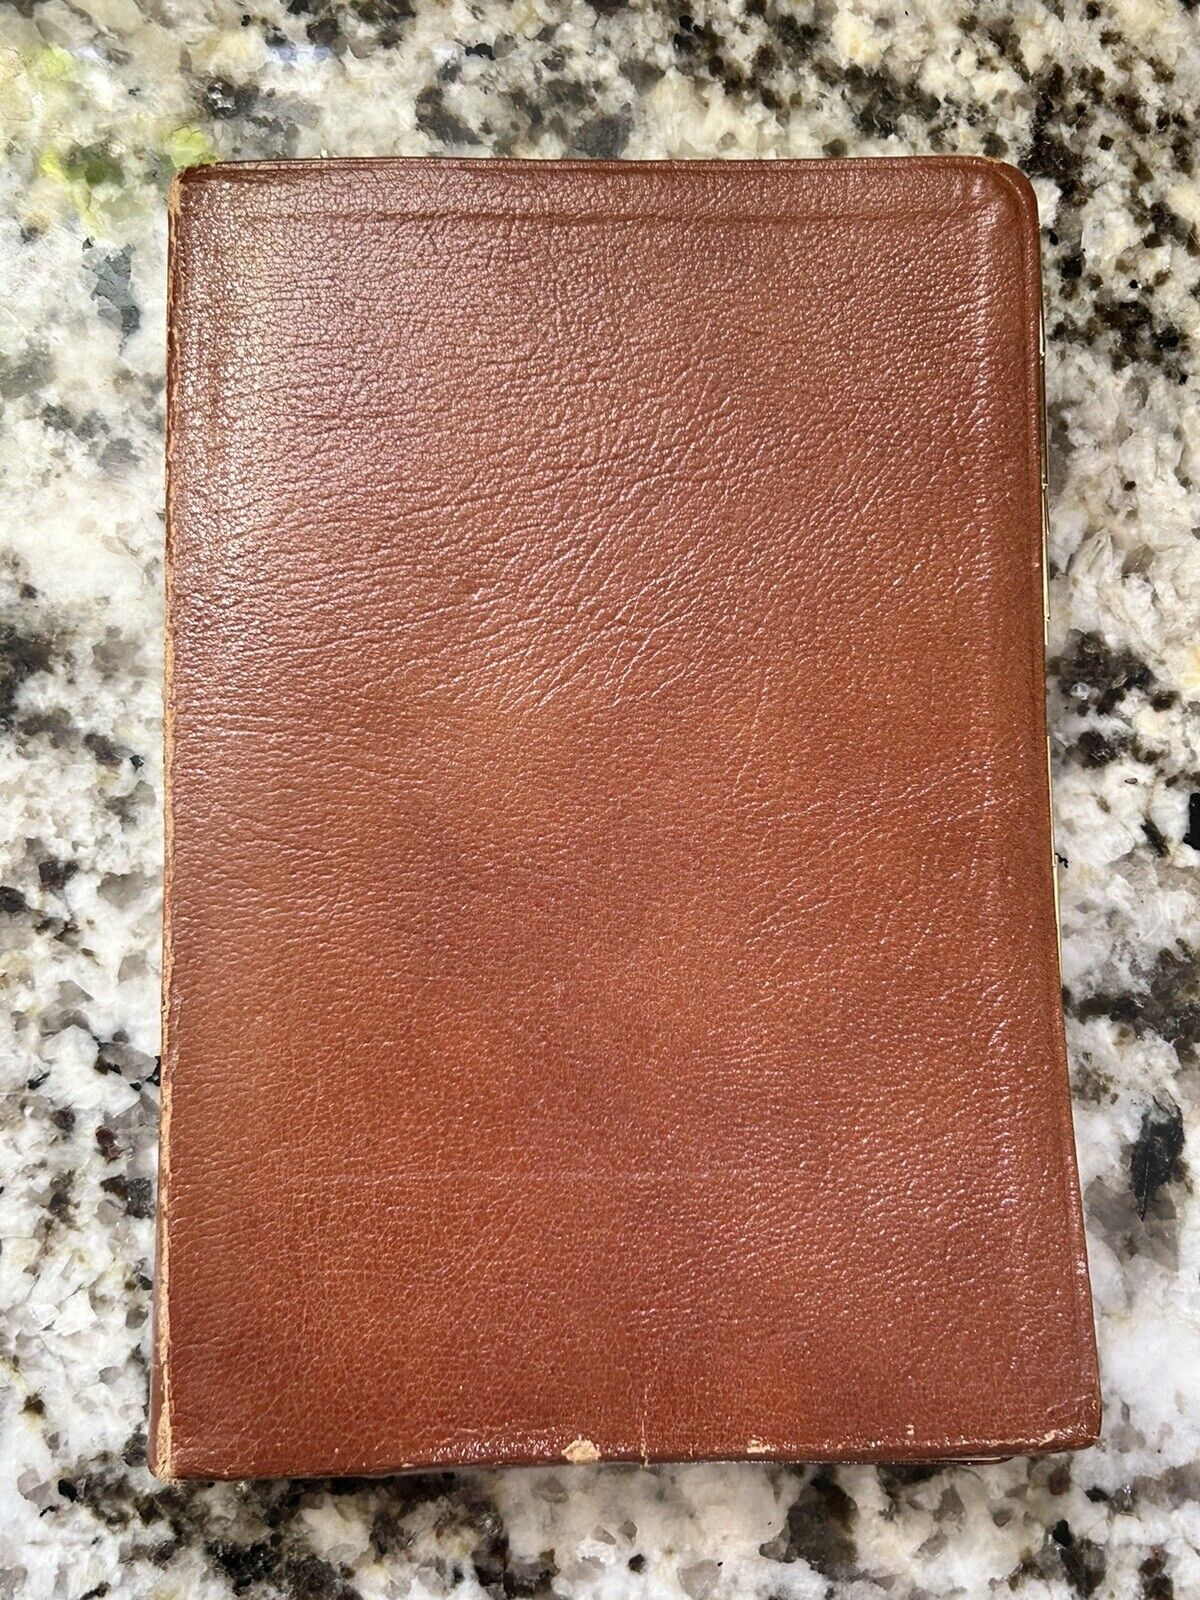 Rare KIRKBRIDE Thompson Chain Reference Bible  Genuine Leather